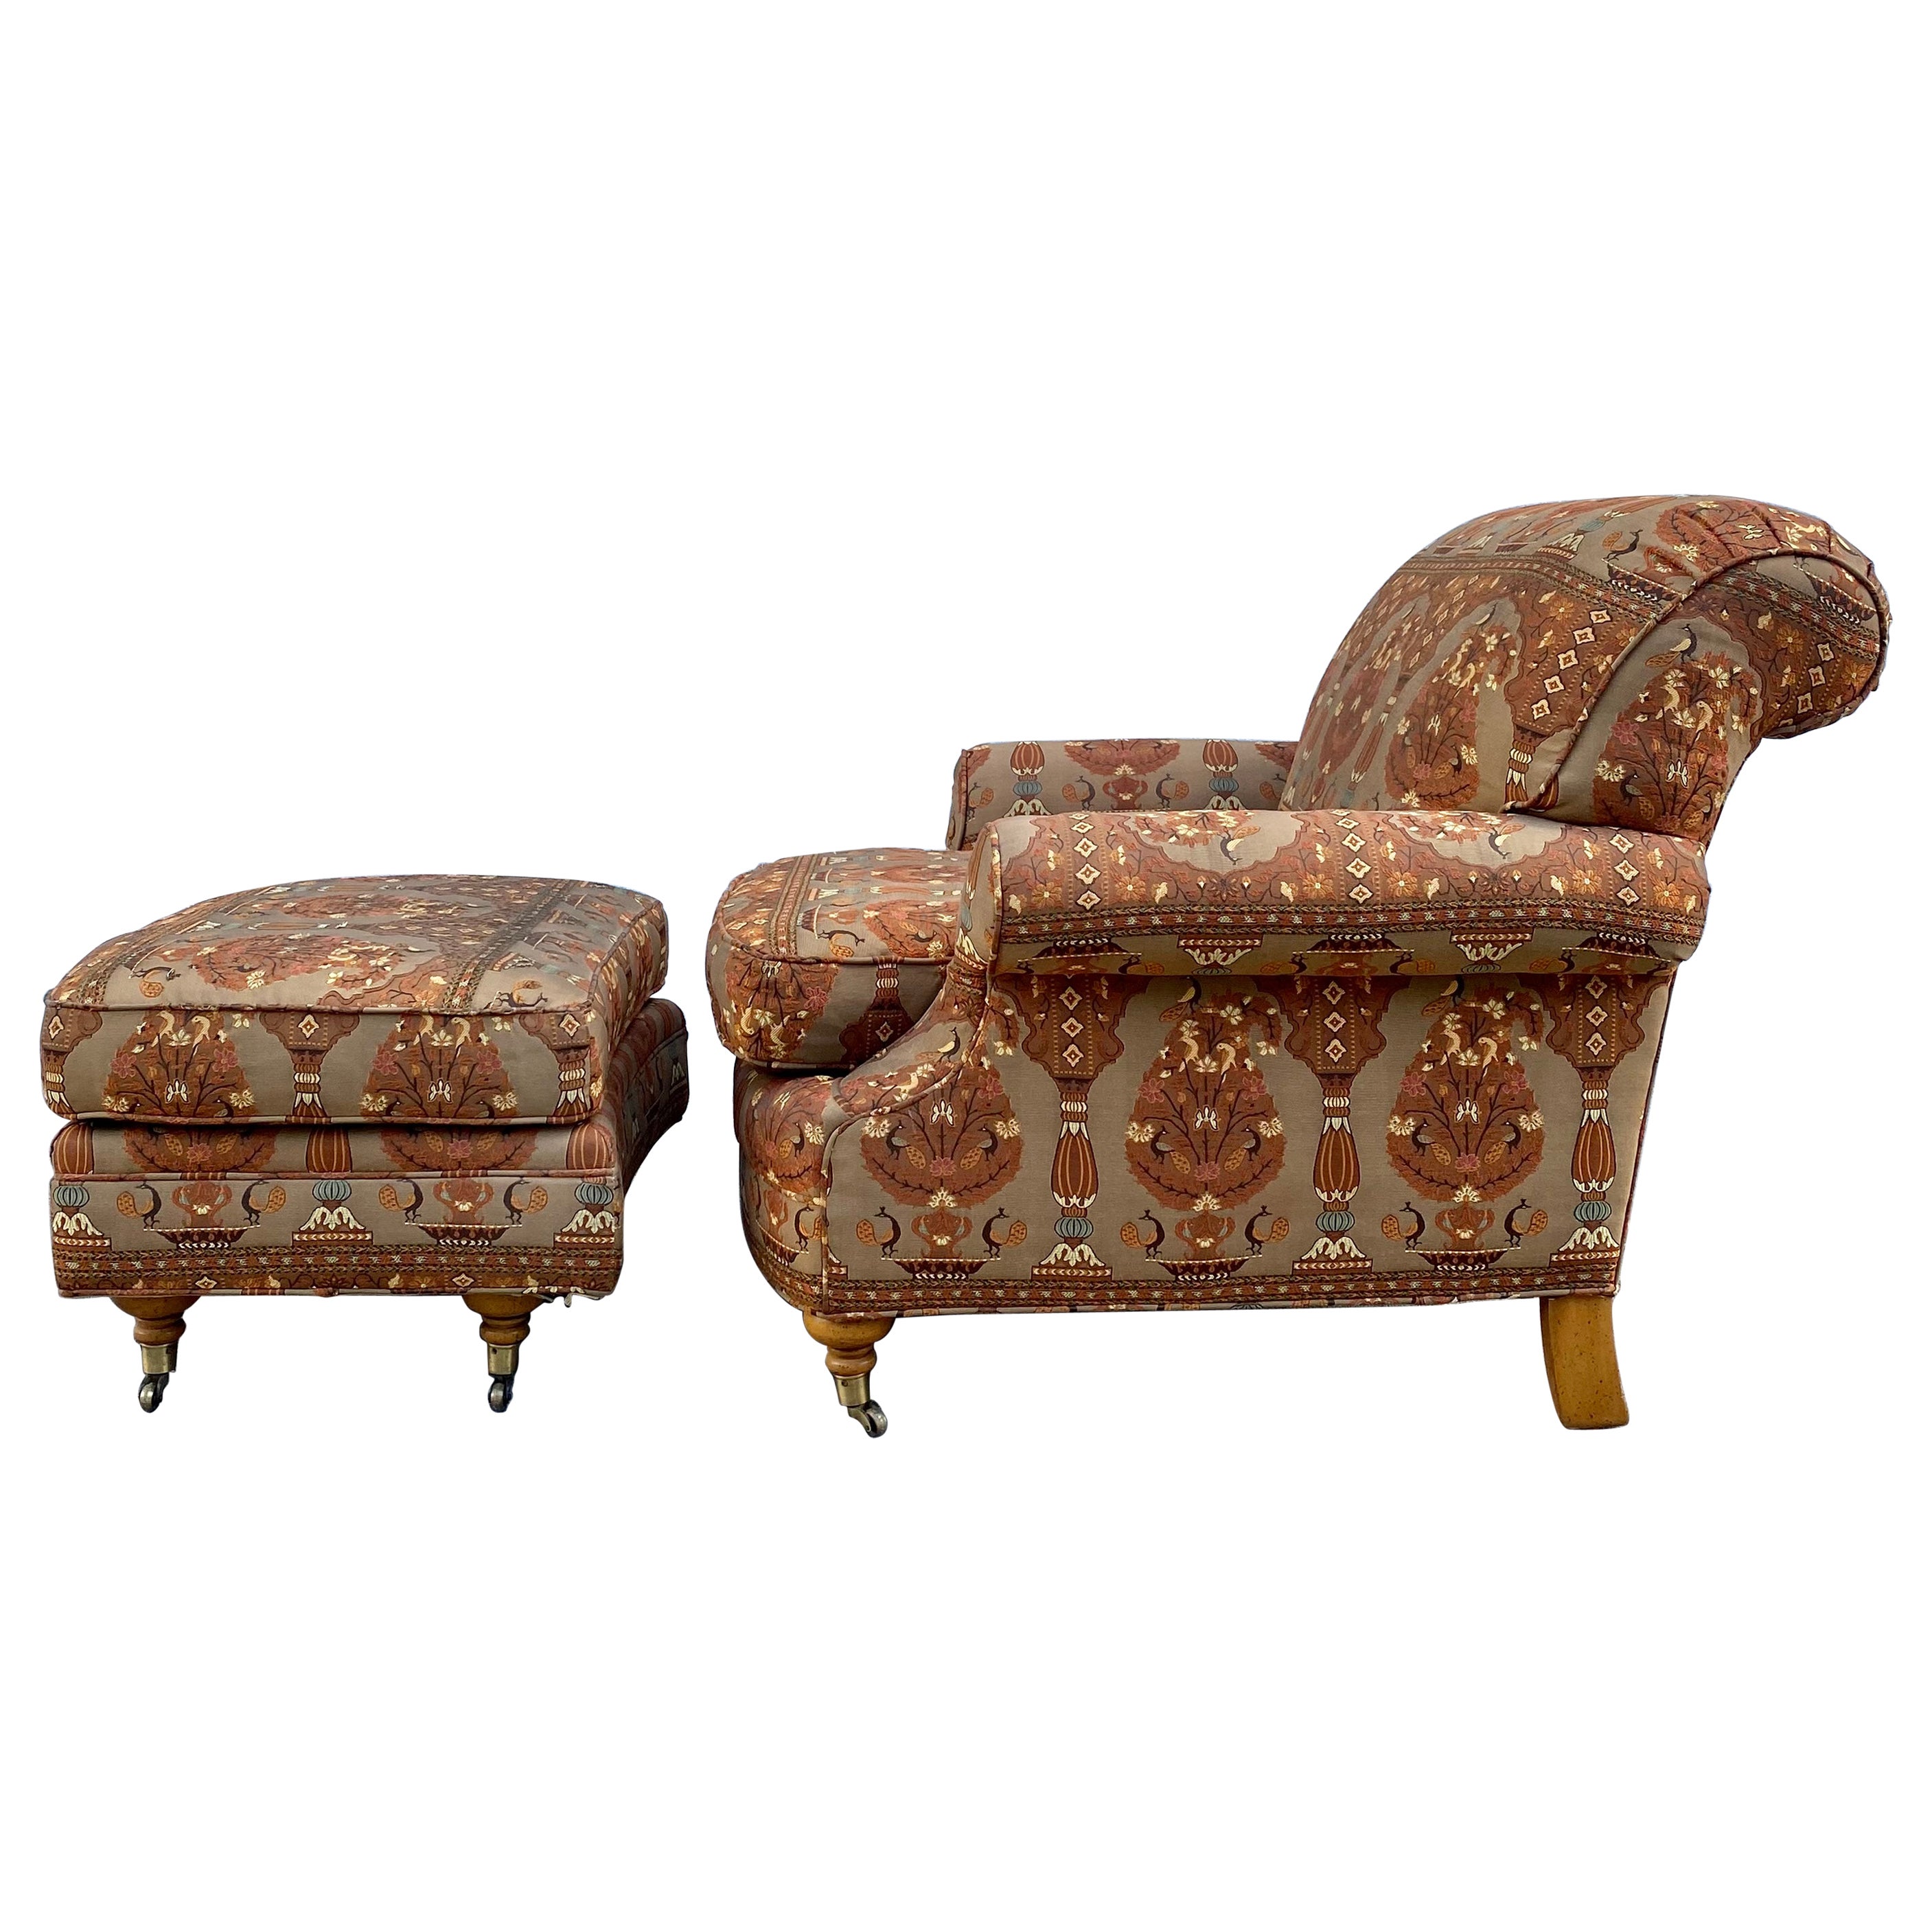 1980s Attributed to George Smith Textile Armchair & Ottoman, Set of 2